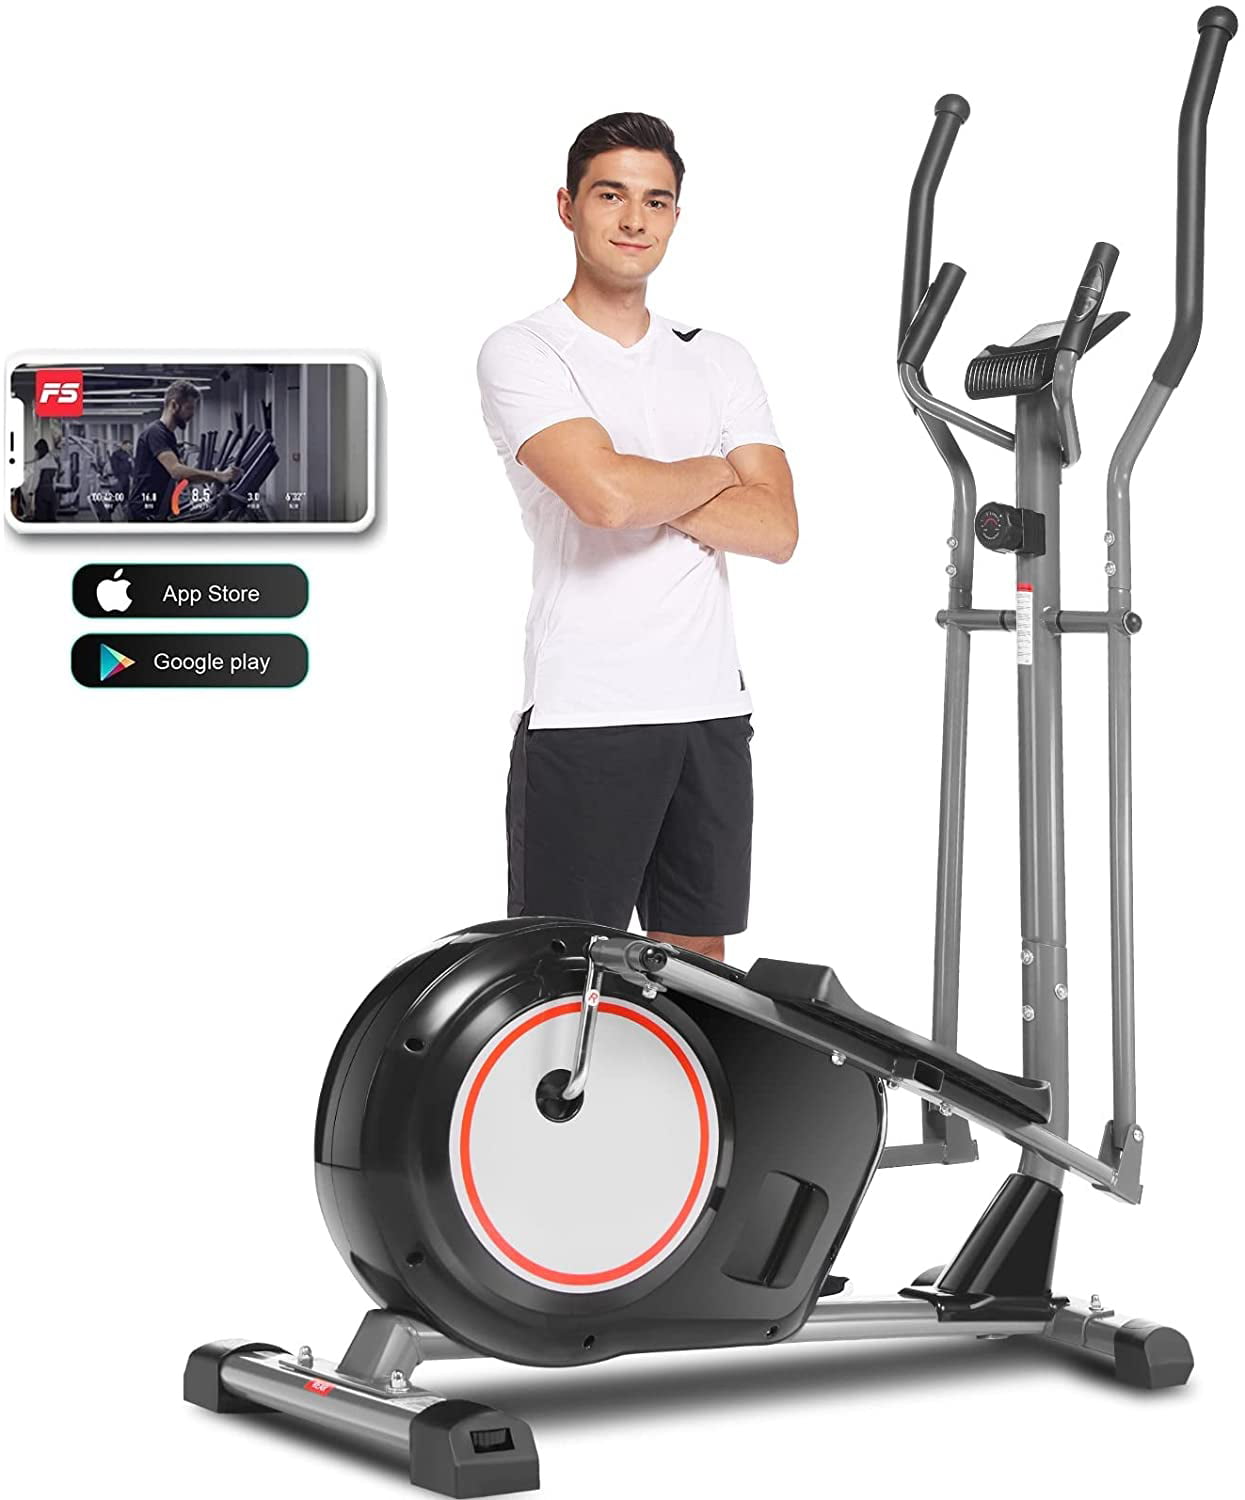 APP Elliptical Trainer Cross Trainer with 10 Levels of Magnetic Resistance Heart Rate Sensor Enhanced LCD Monitor FUNMILY Elliptical Machine APP & 390 lbs Weight Capacity for Home Gym 